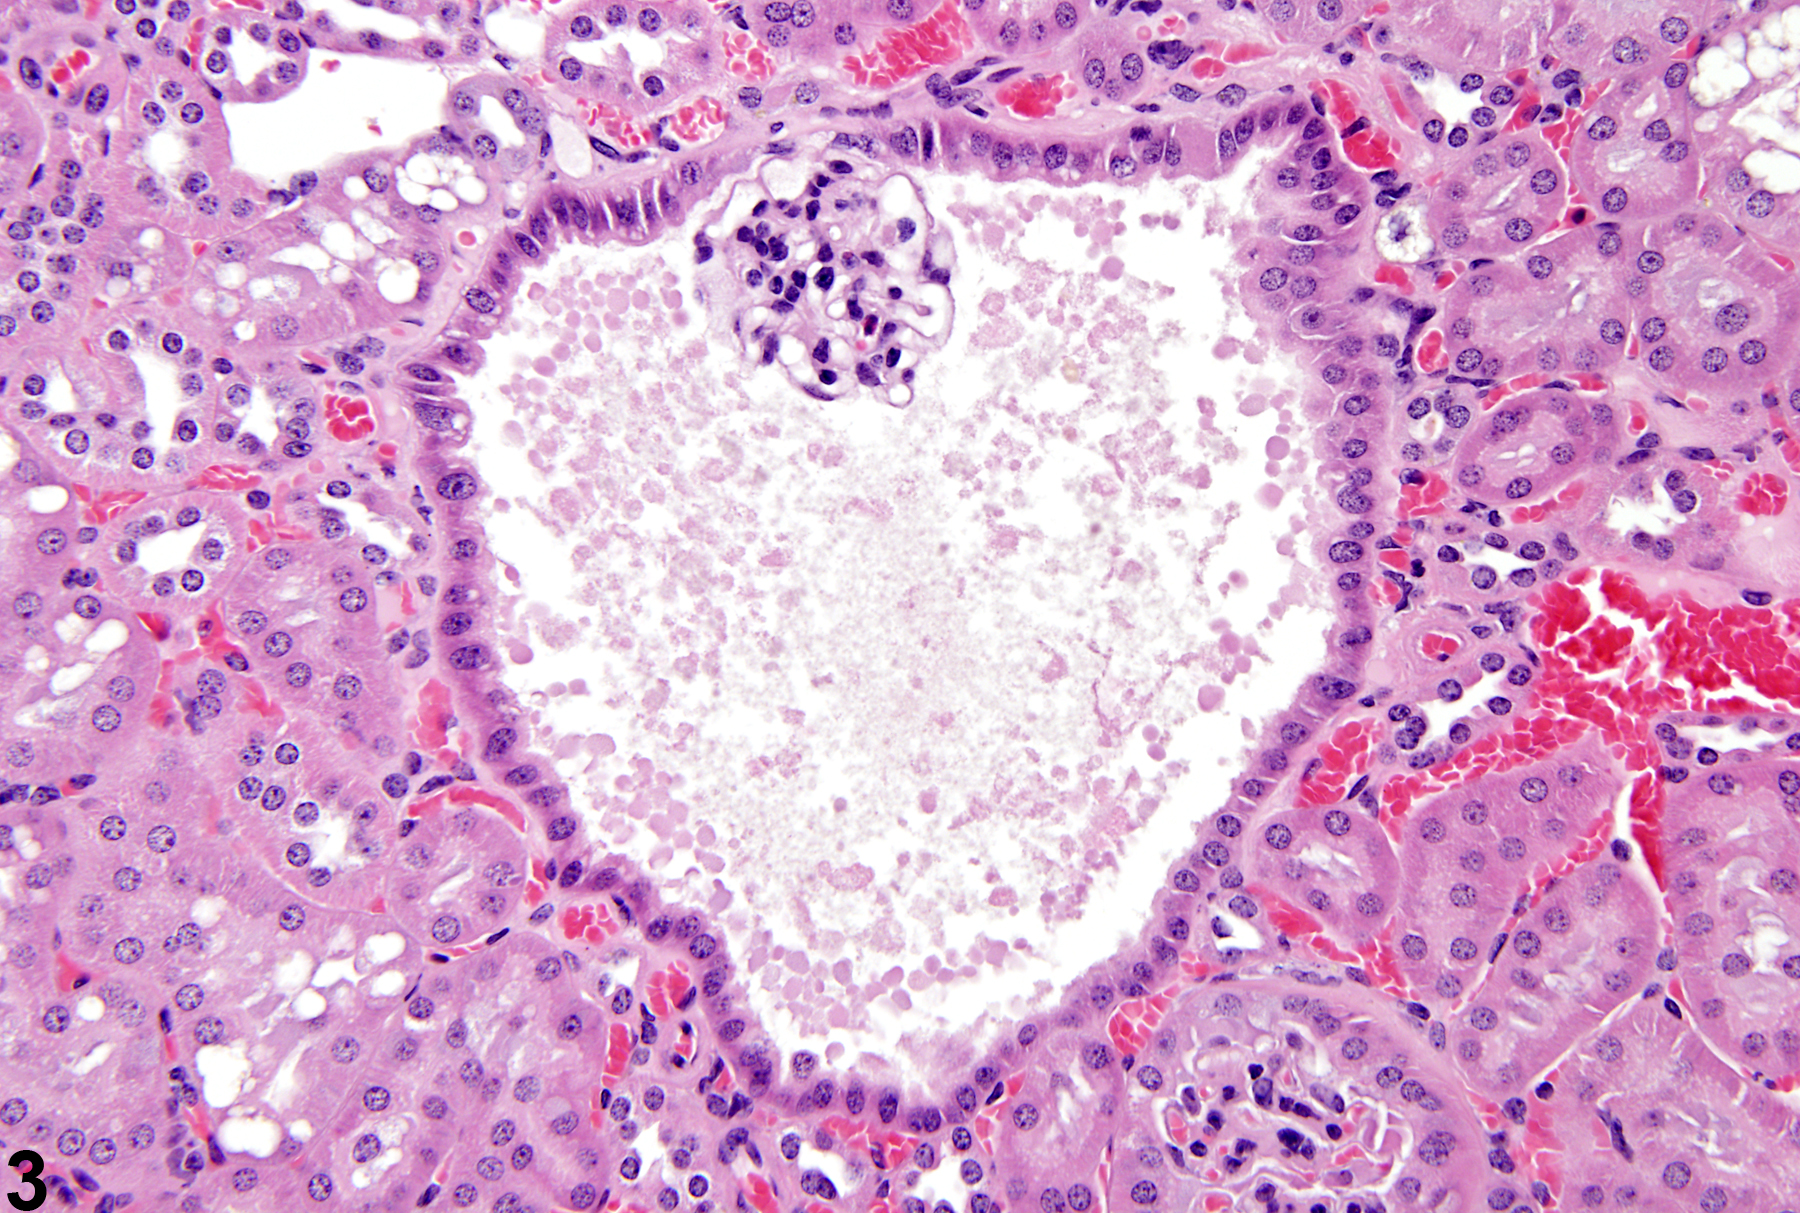 Image of cyst in the kidney from a male B6C3F1 mouse in a chronic study